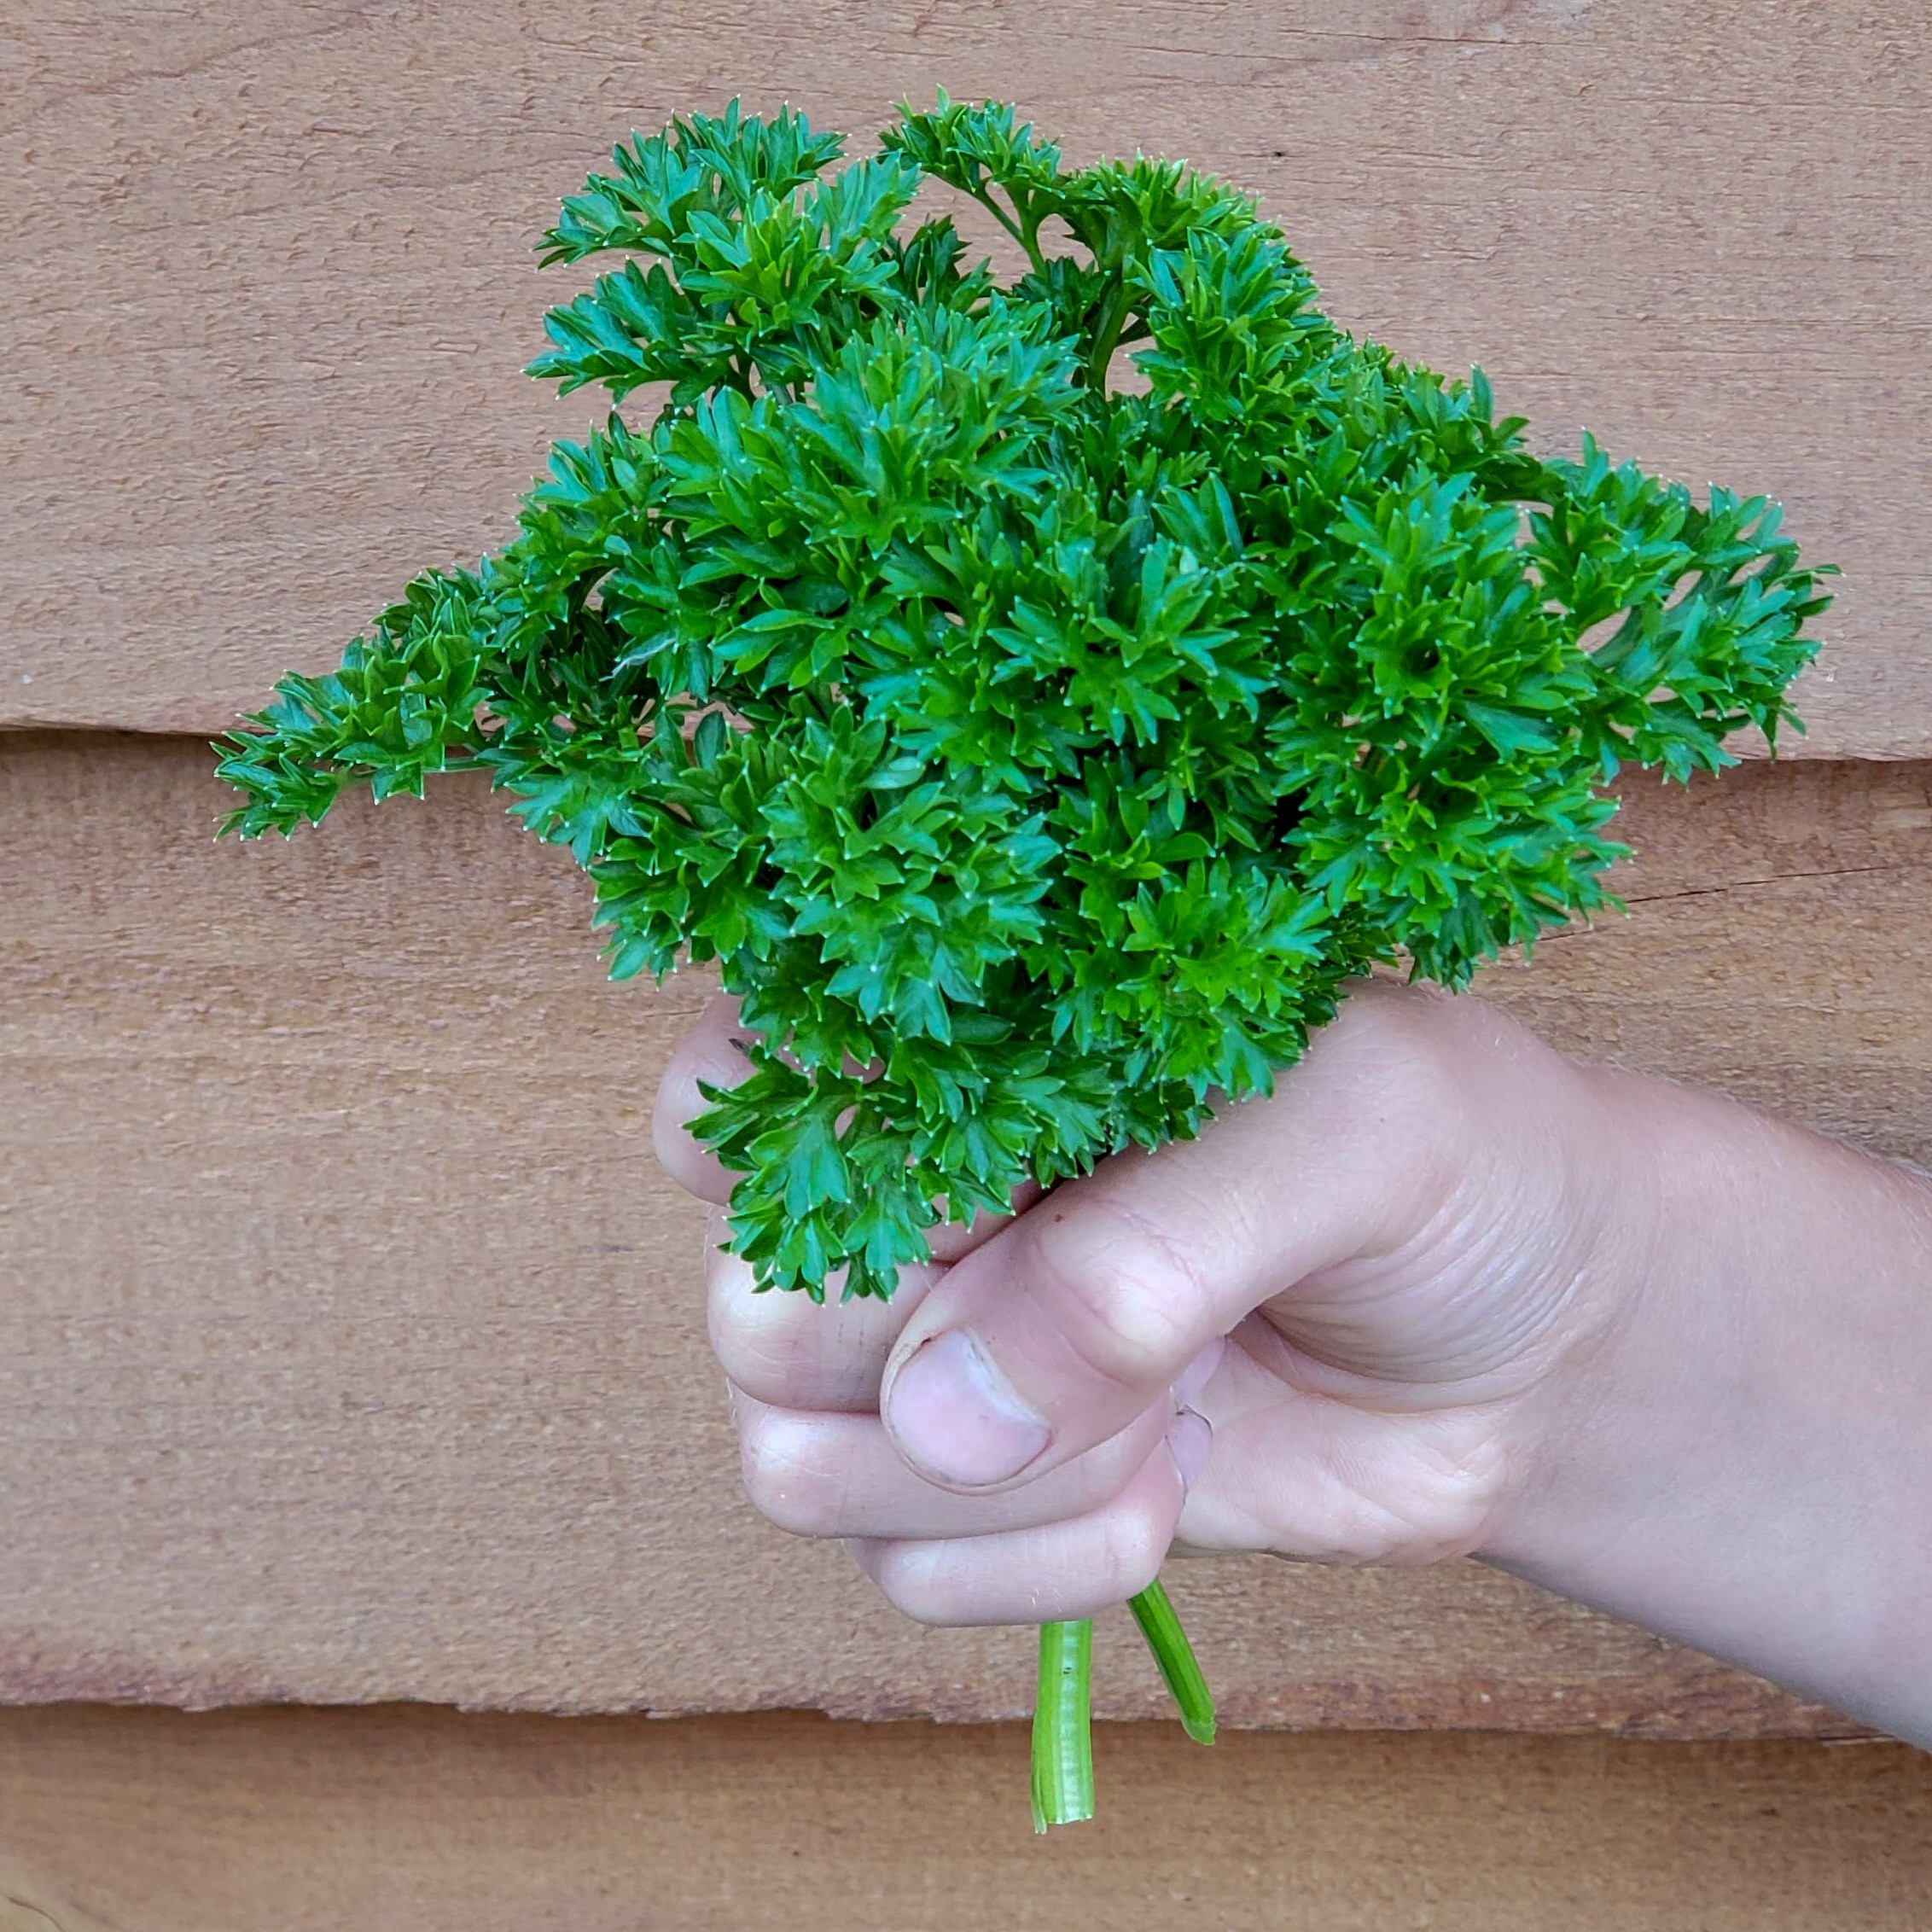 Parsley Triple Curled bunch in hand.